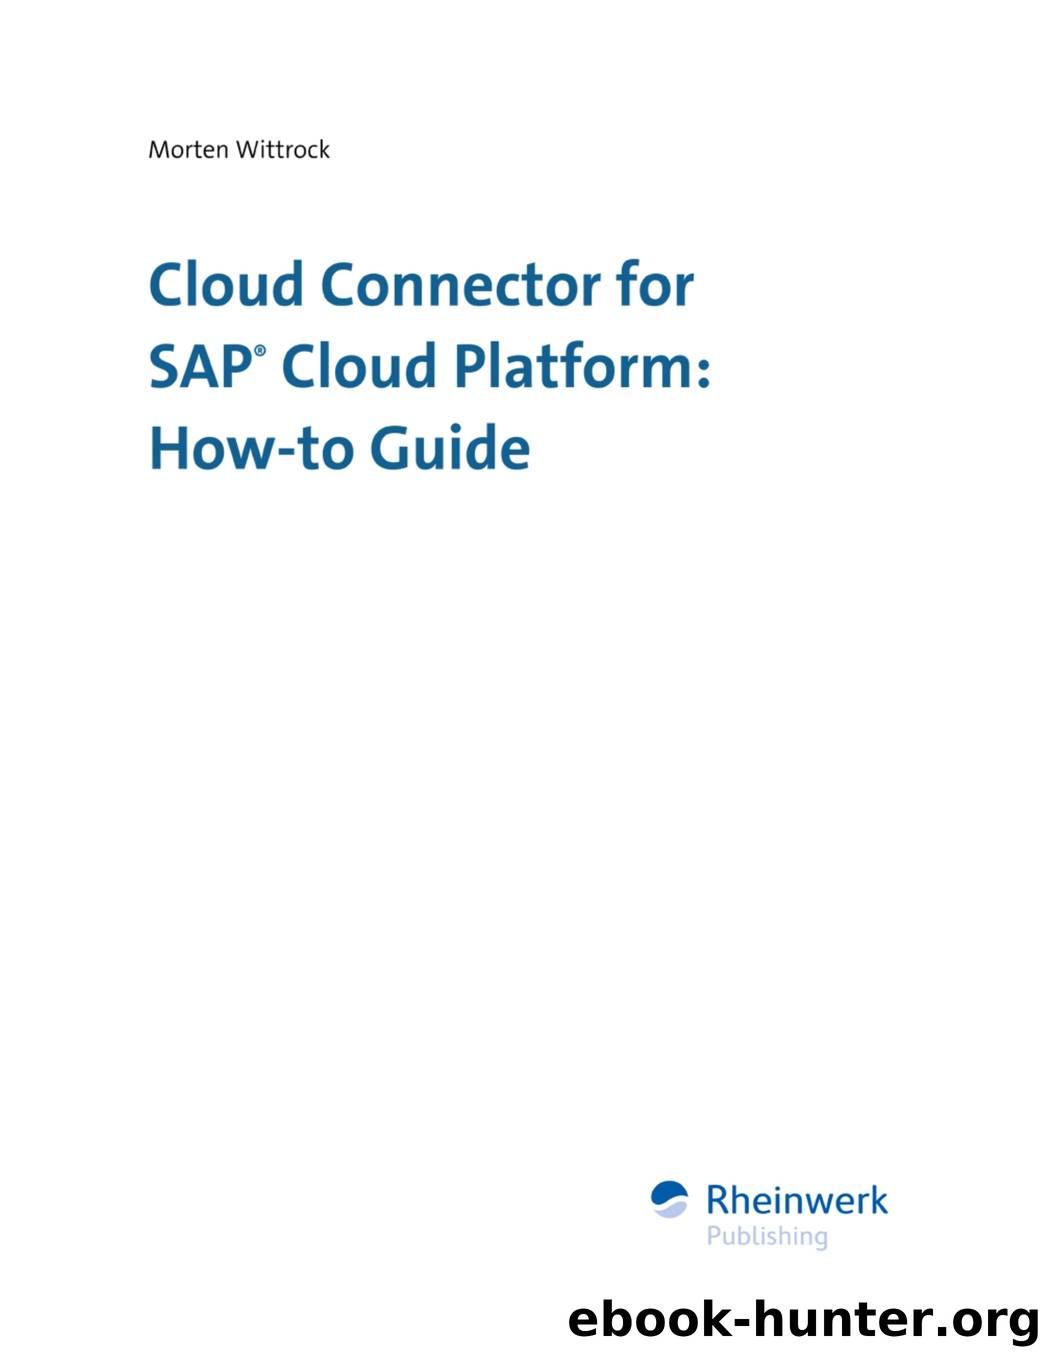 Cloud Connector for SAP Cloud Platform by How-to Guide